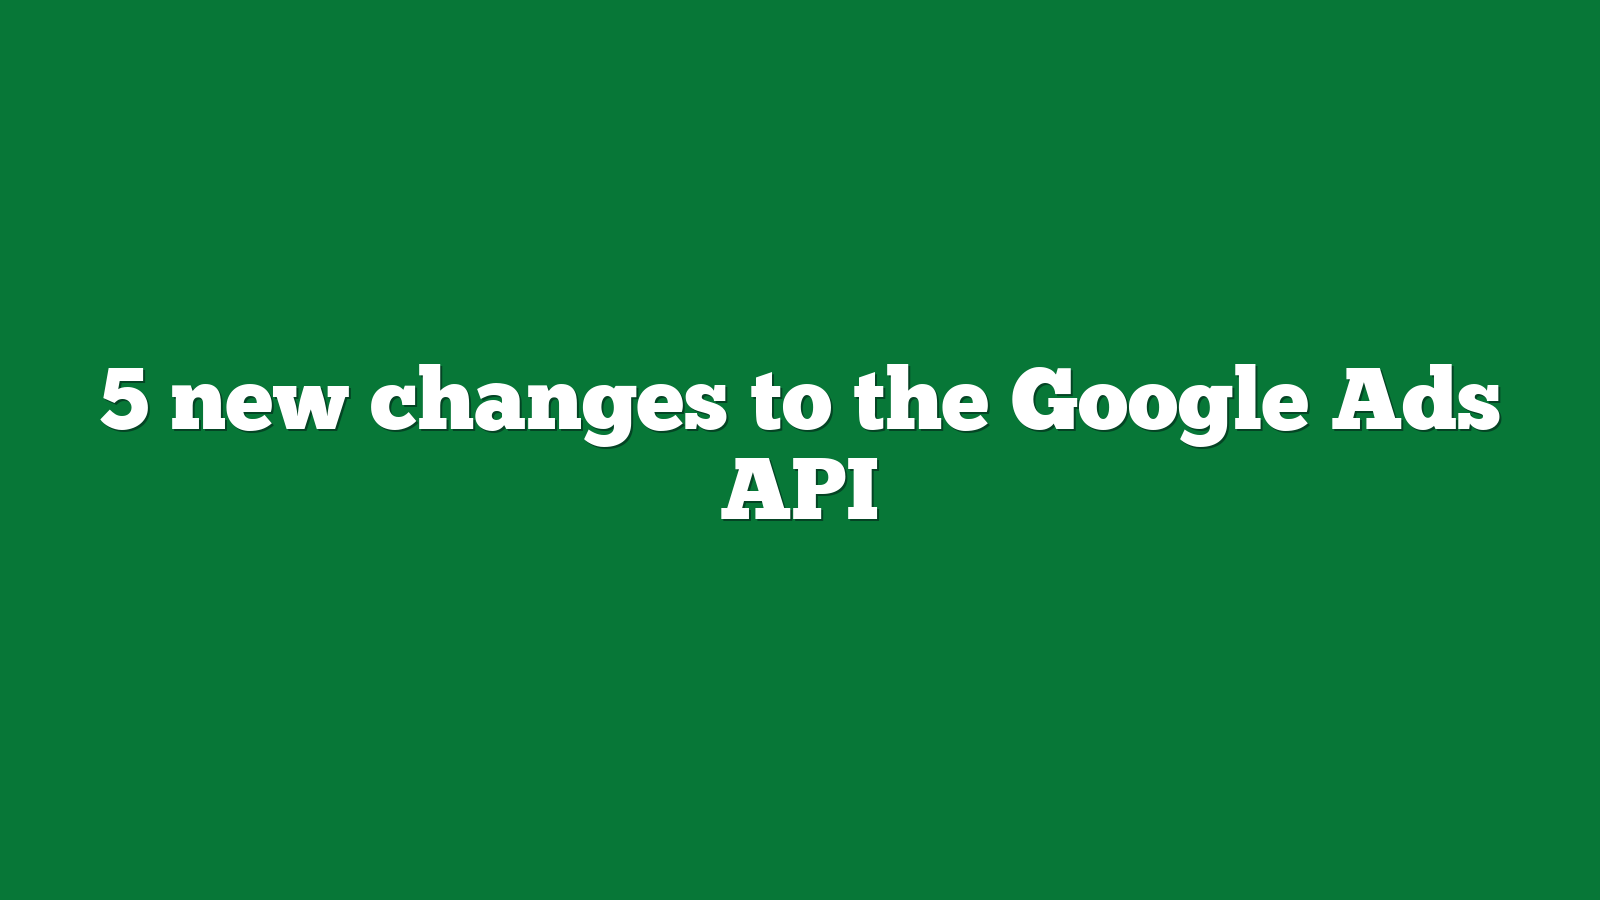 5 new changes to the Google Ads API